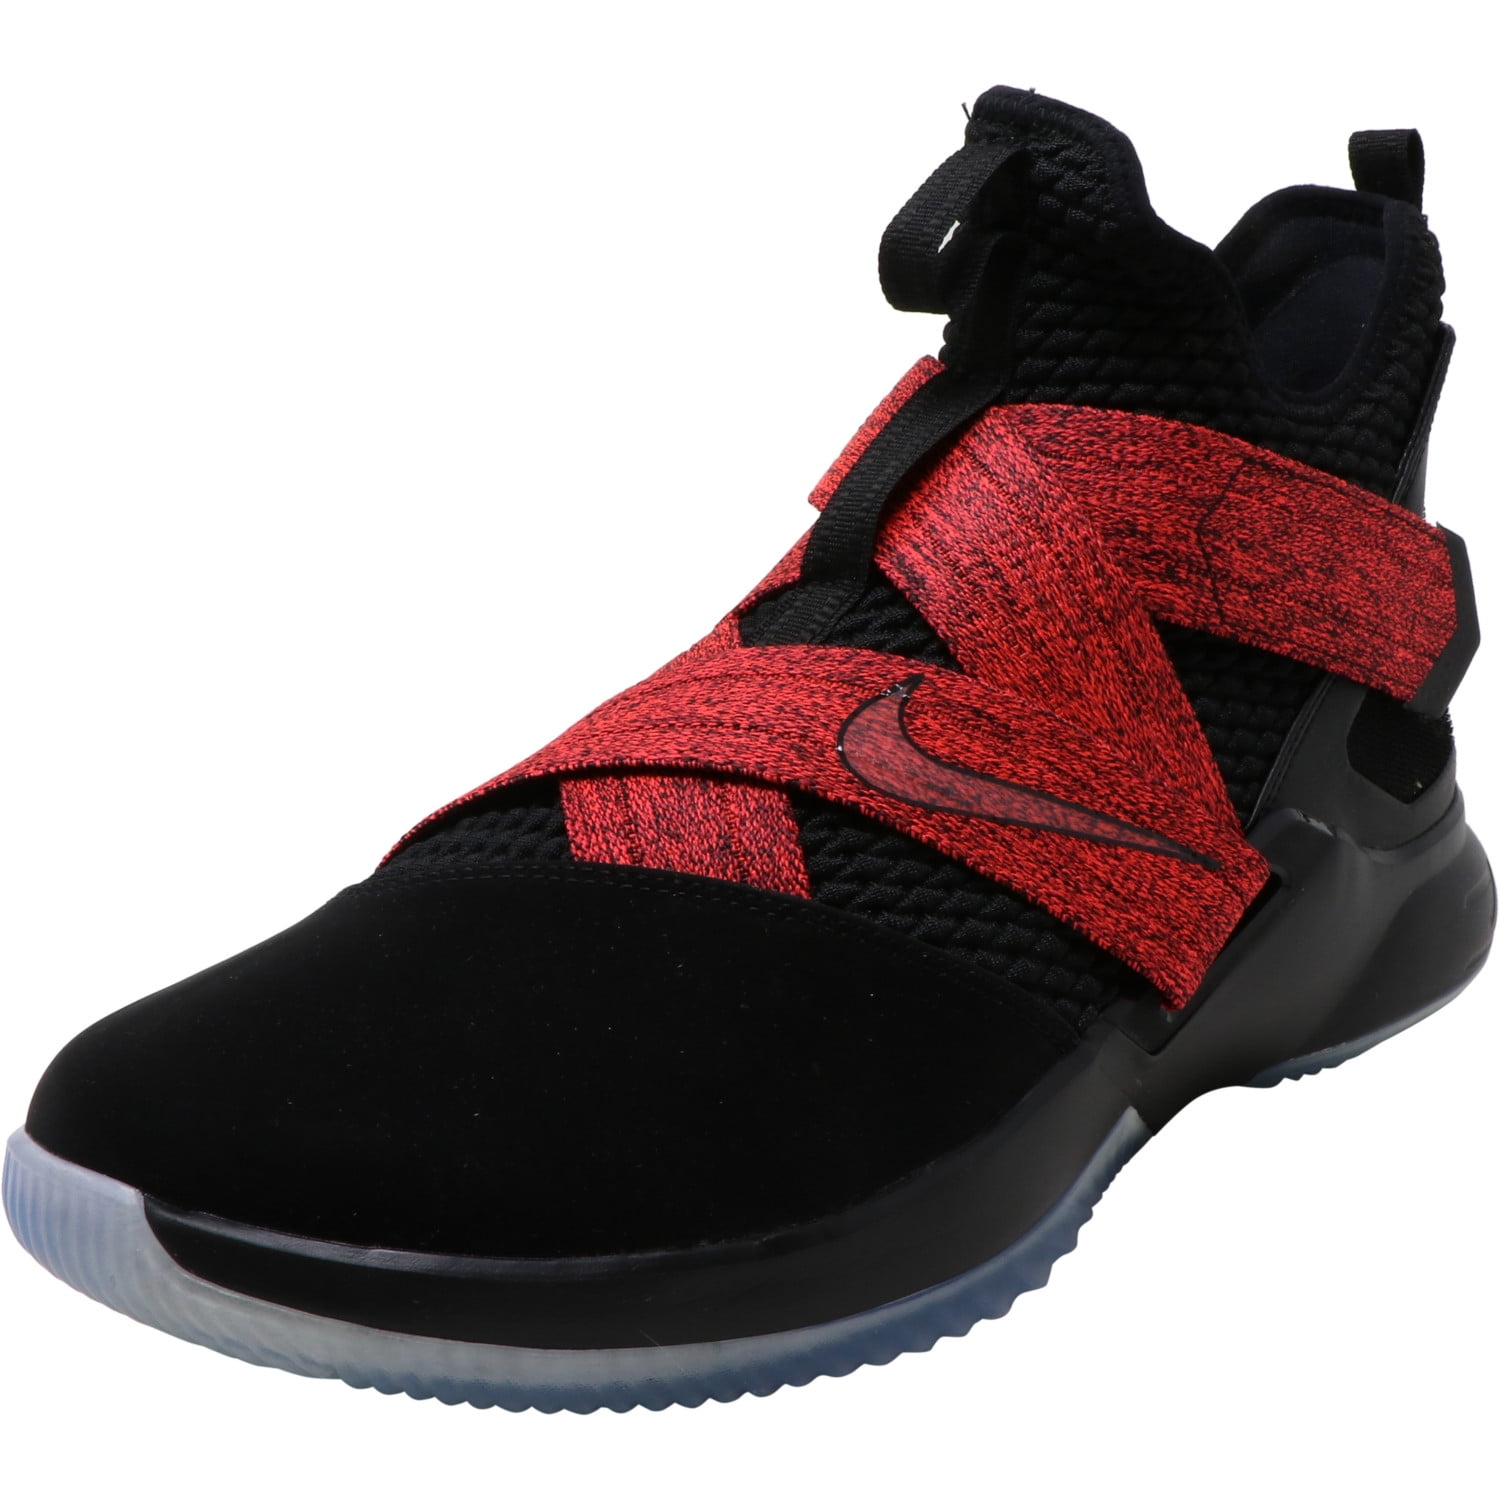 nike men's zoom lebron soldier xii basketball shoes